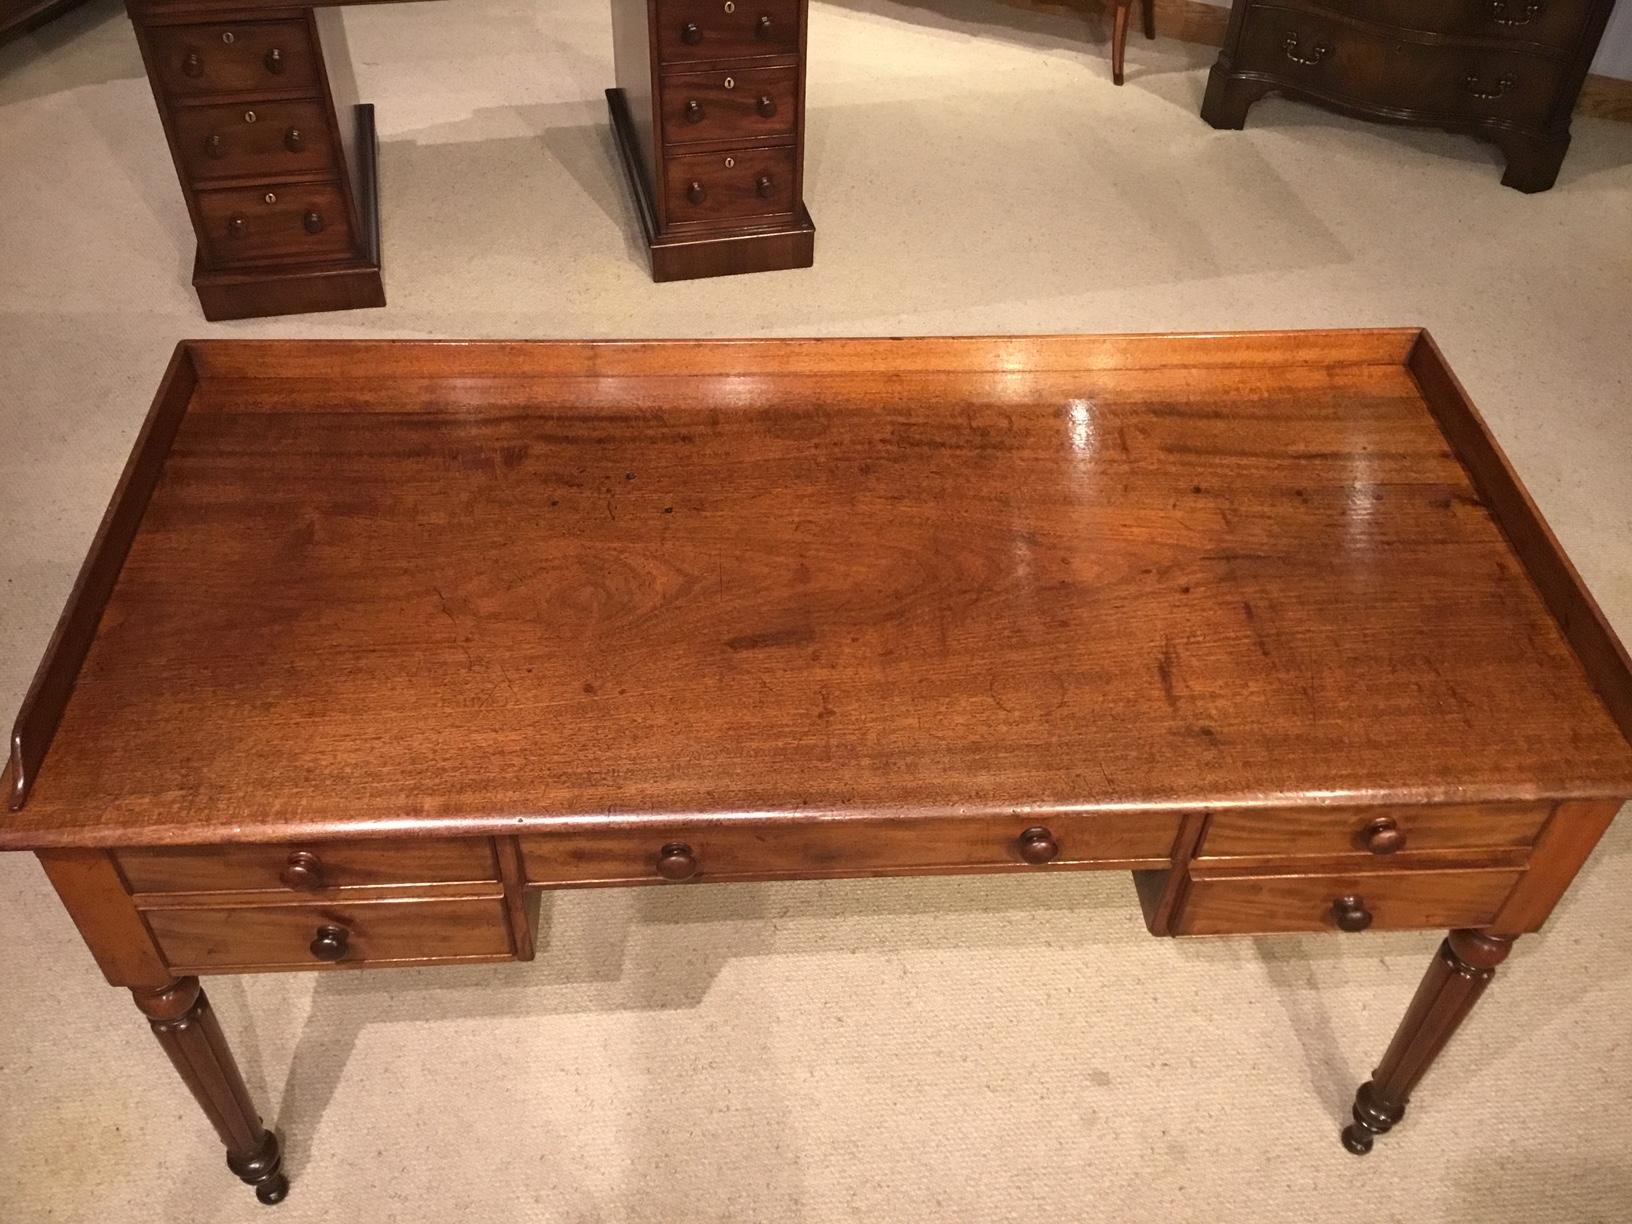 A mahogany Regency period dressing table or side table. Having a superb one piece Cuban mahogany top with a raised galleried back above an arrangement of five rectangular mahogany lined drawers, retaining their original mahogany turned knobs.